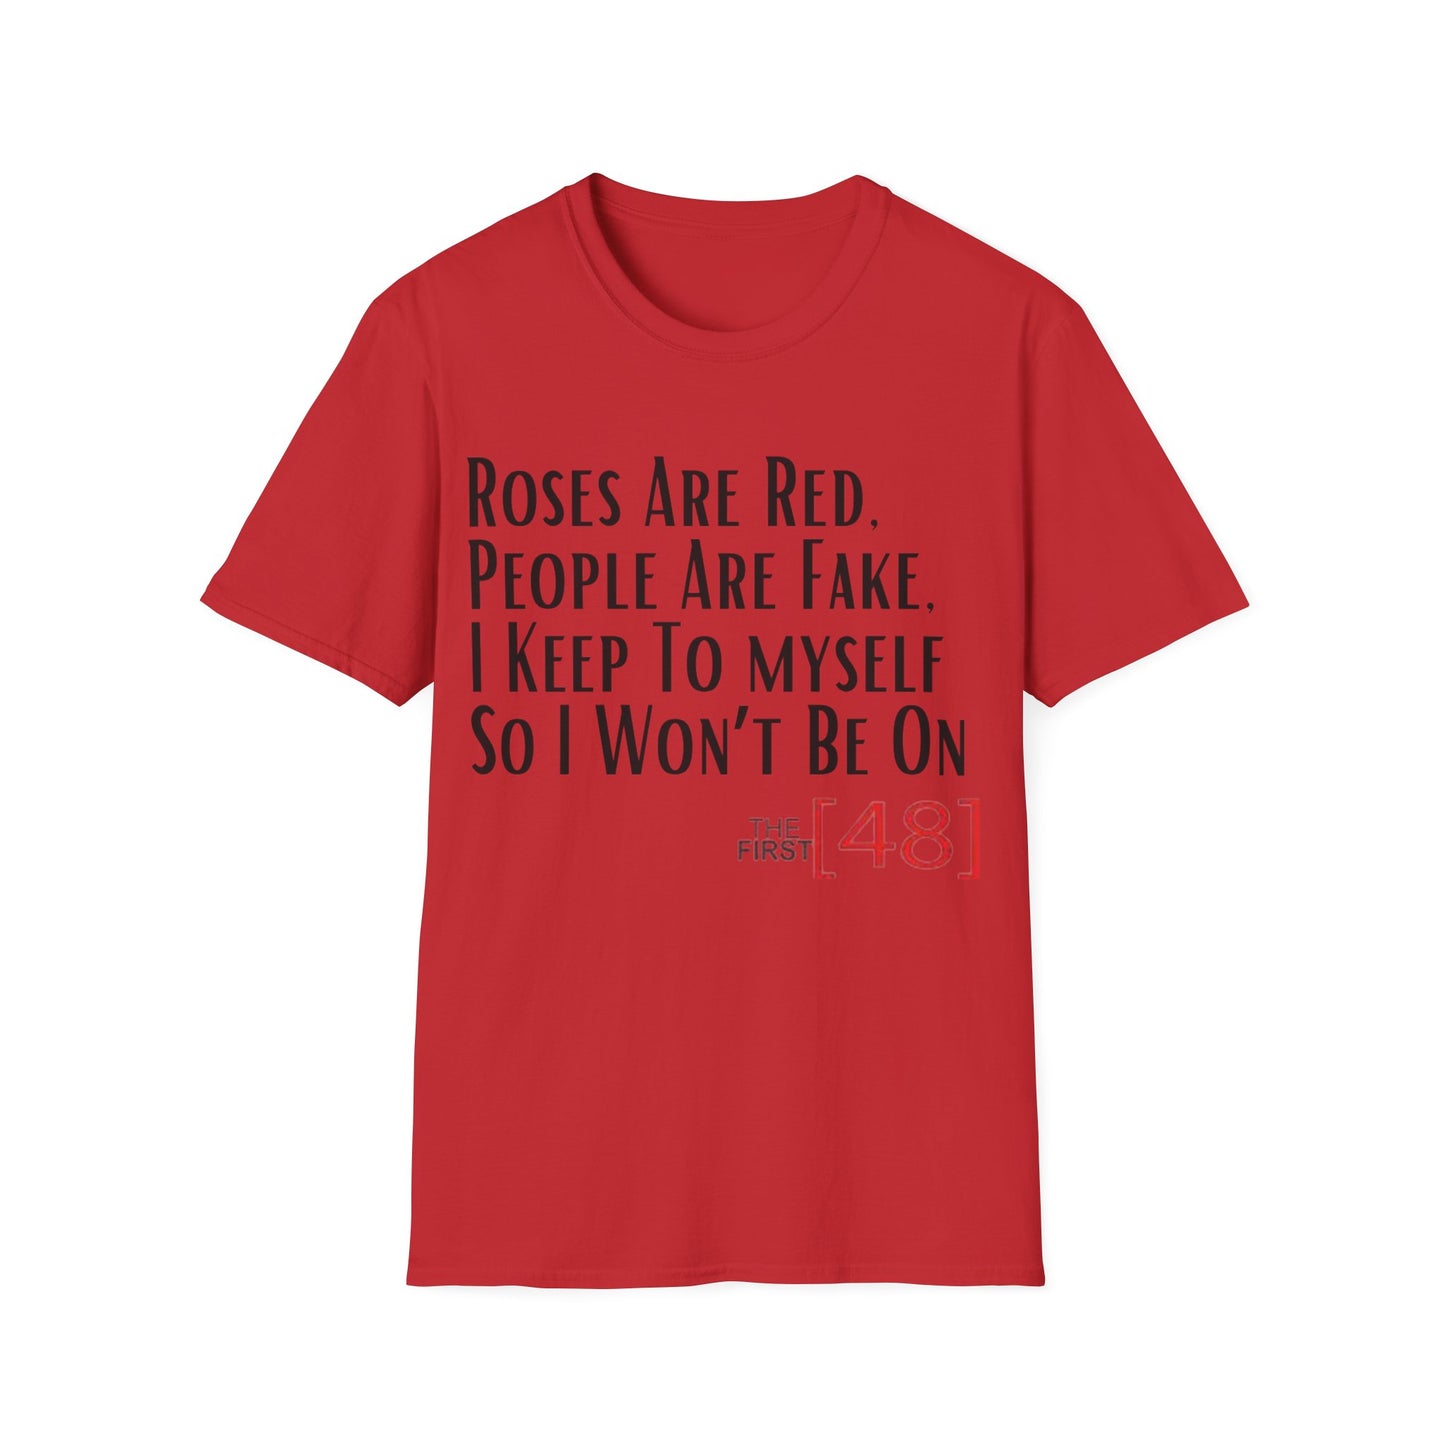 Rose are red...The First 48 Valentine - Unisex Softstyle T-Shirt